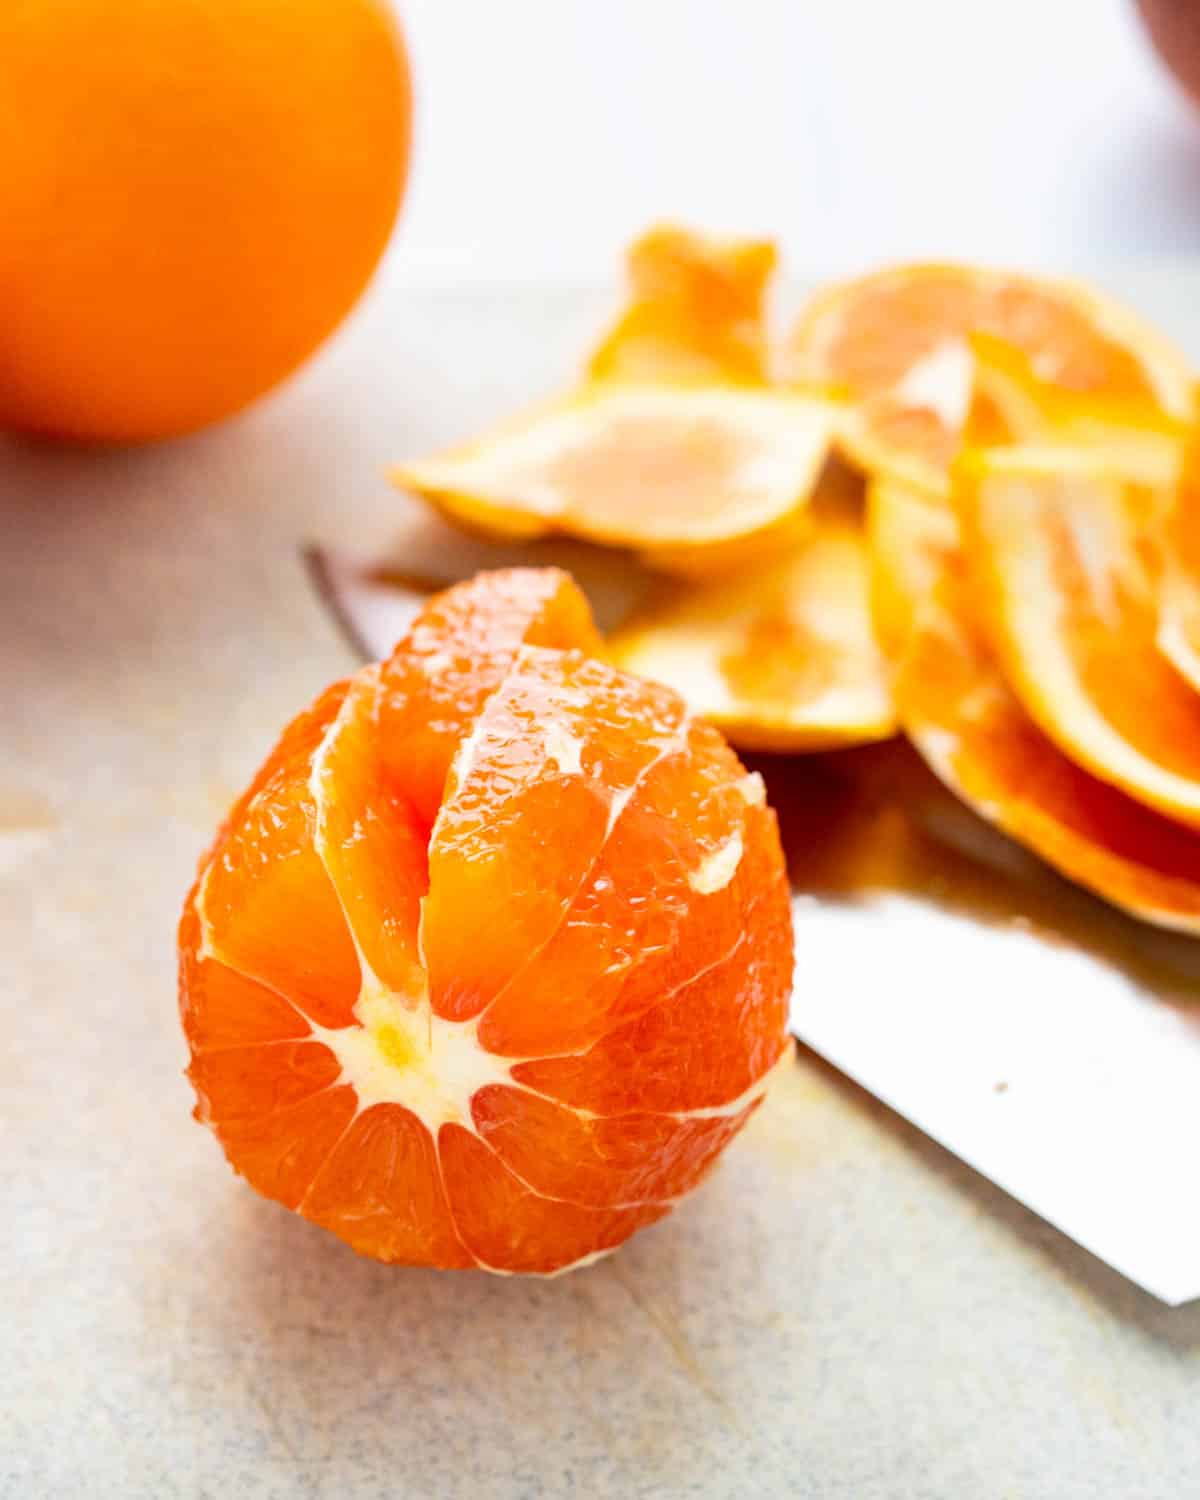 Cutting individual segments from the oranges.